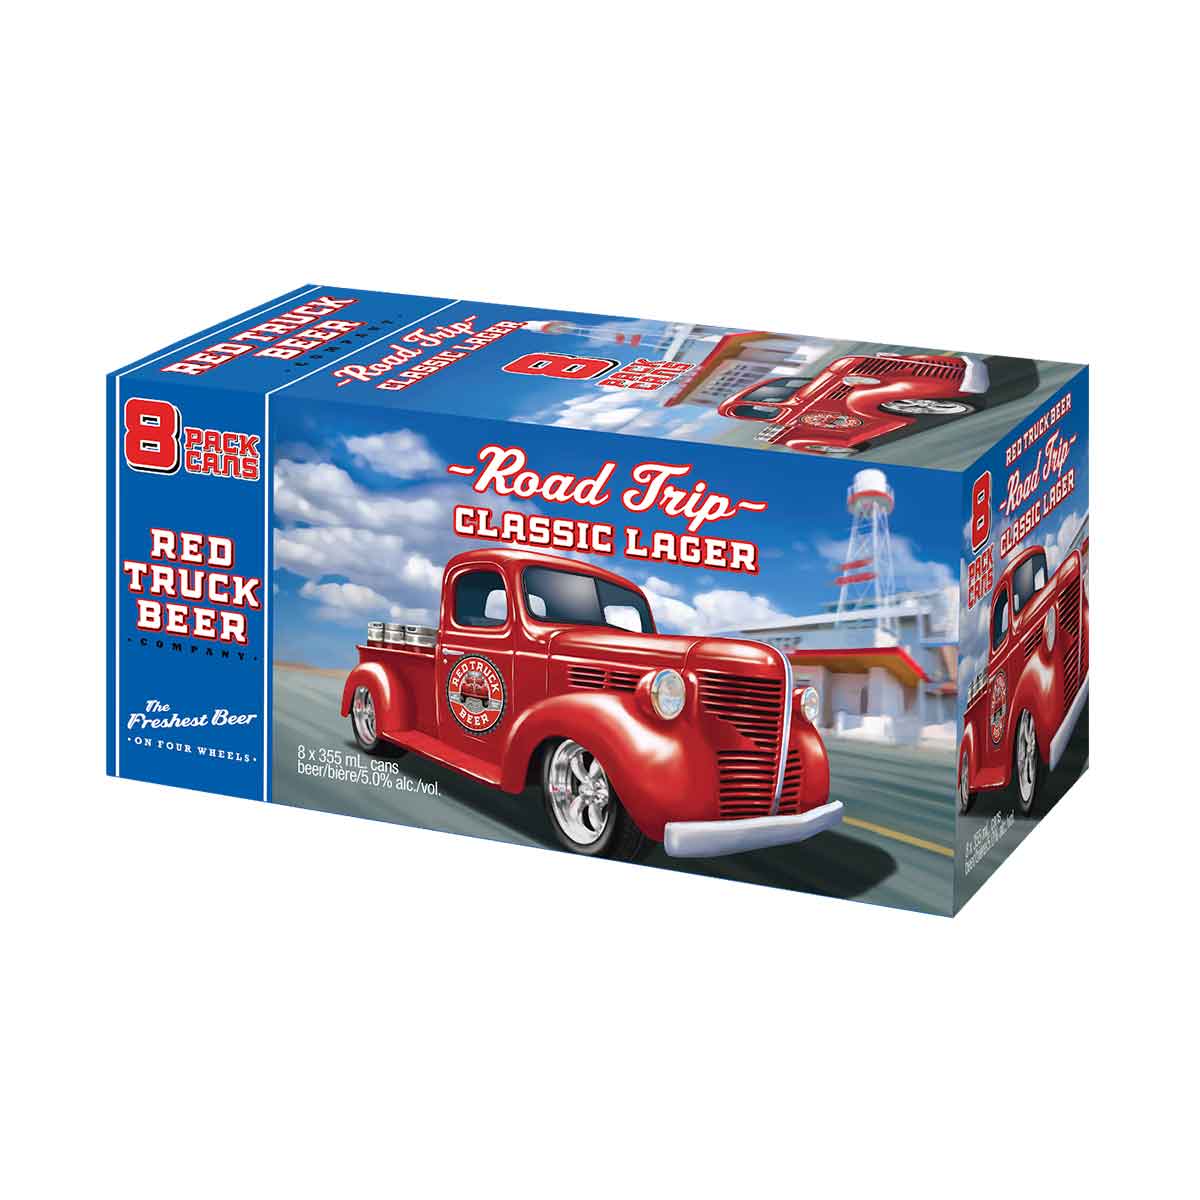 TAG Liquor Stores BC-RED TRUCK LAGER 8 PACK